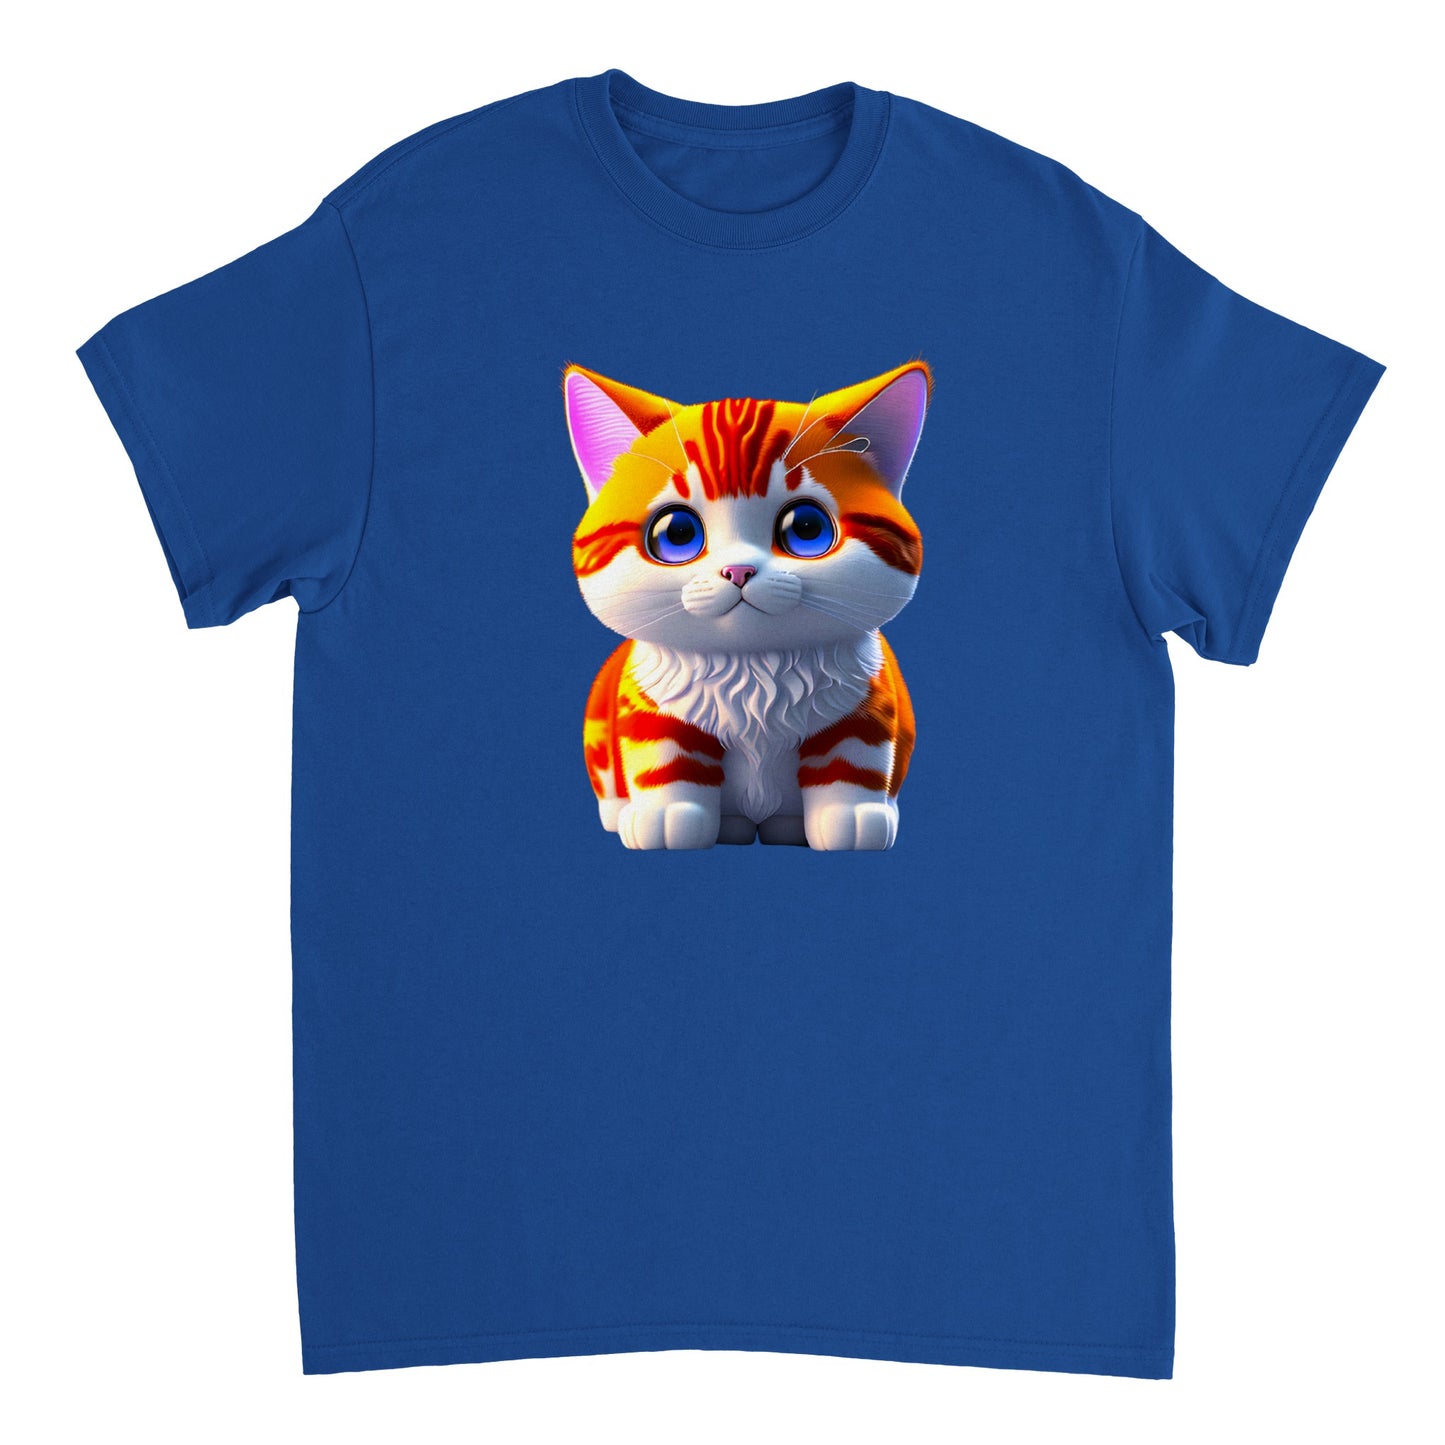 Adorable, Cool, Cute Cats and Kittens Toy - Heavyweight Unisex Crewneck T-shirt 31